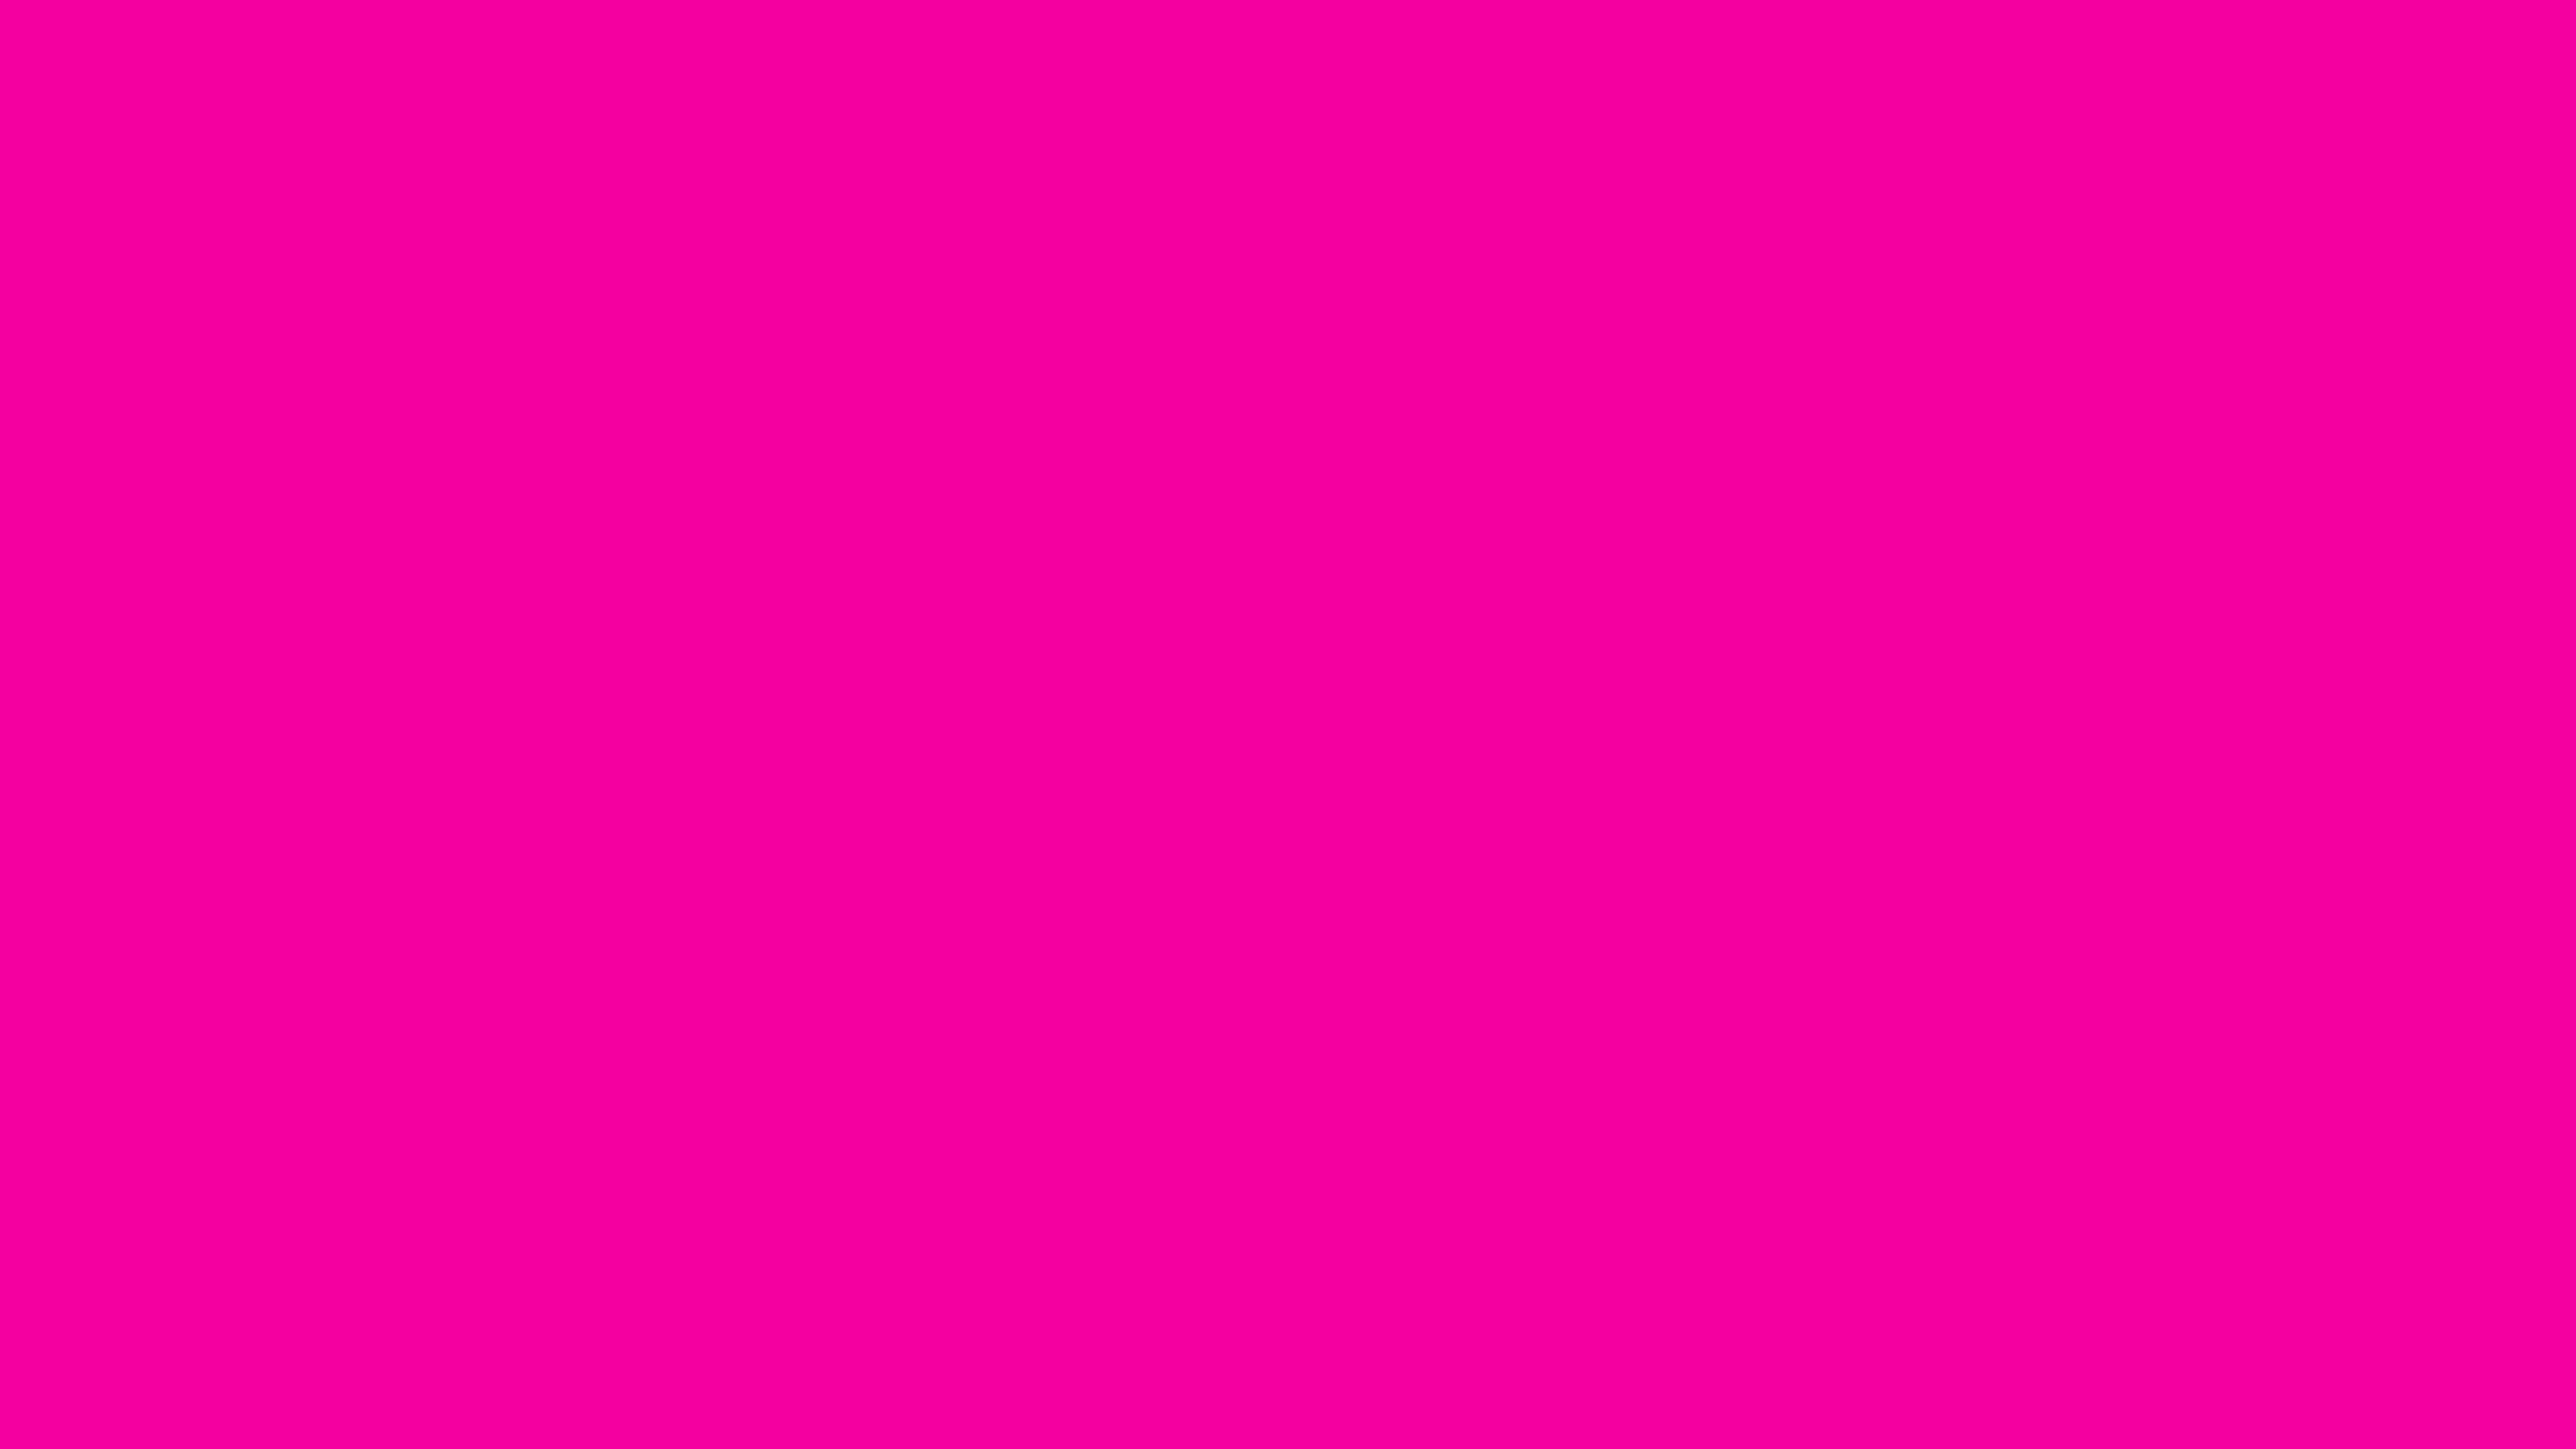 7680x4320 Hollywood Cerise Solid Color Background